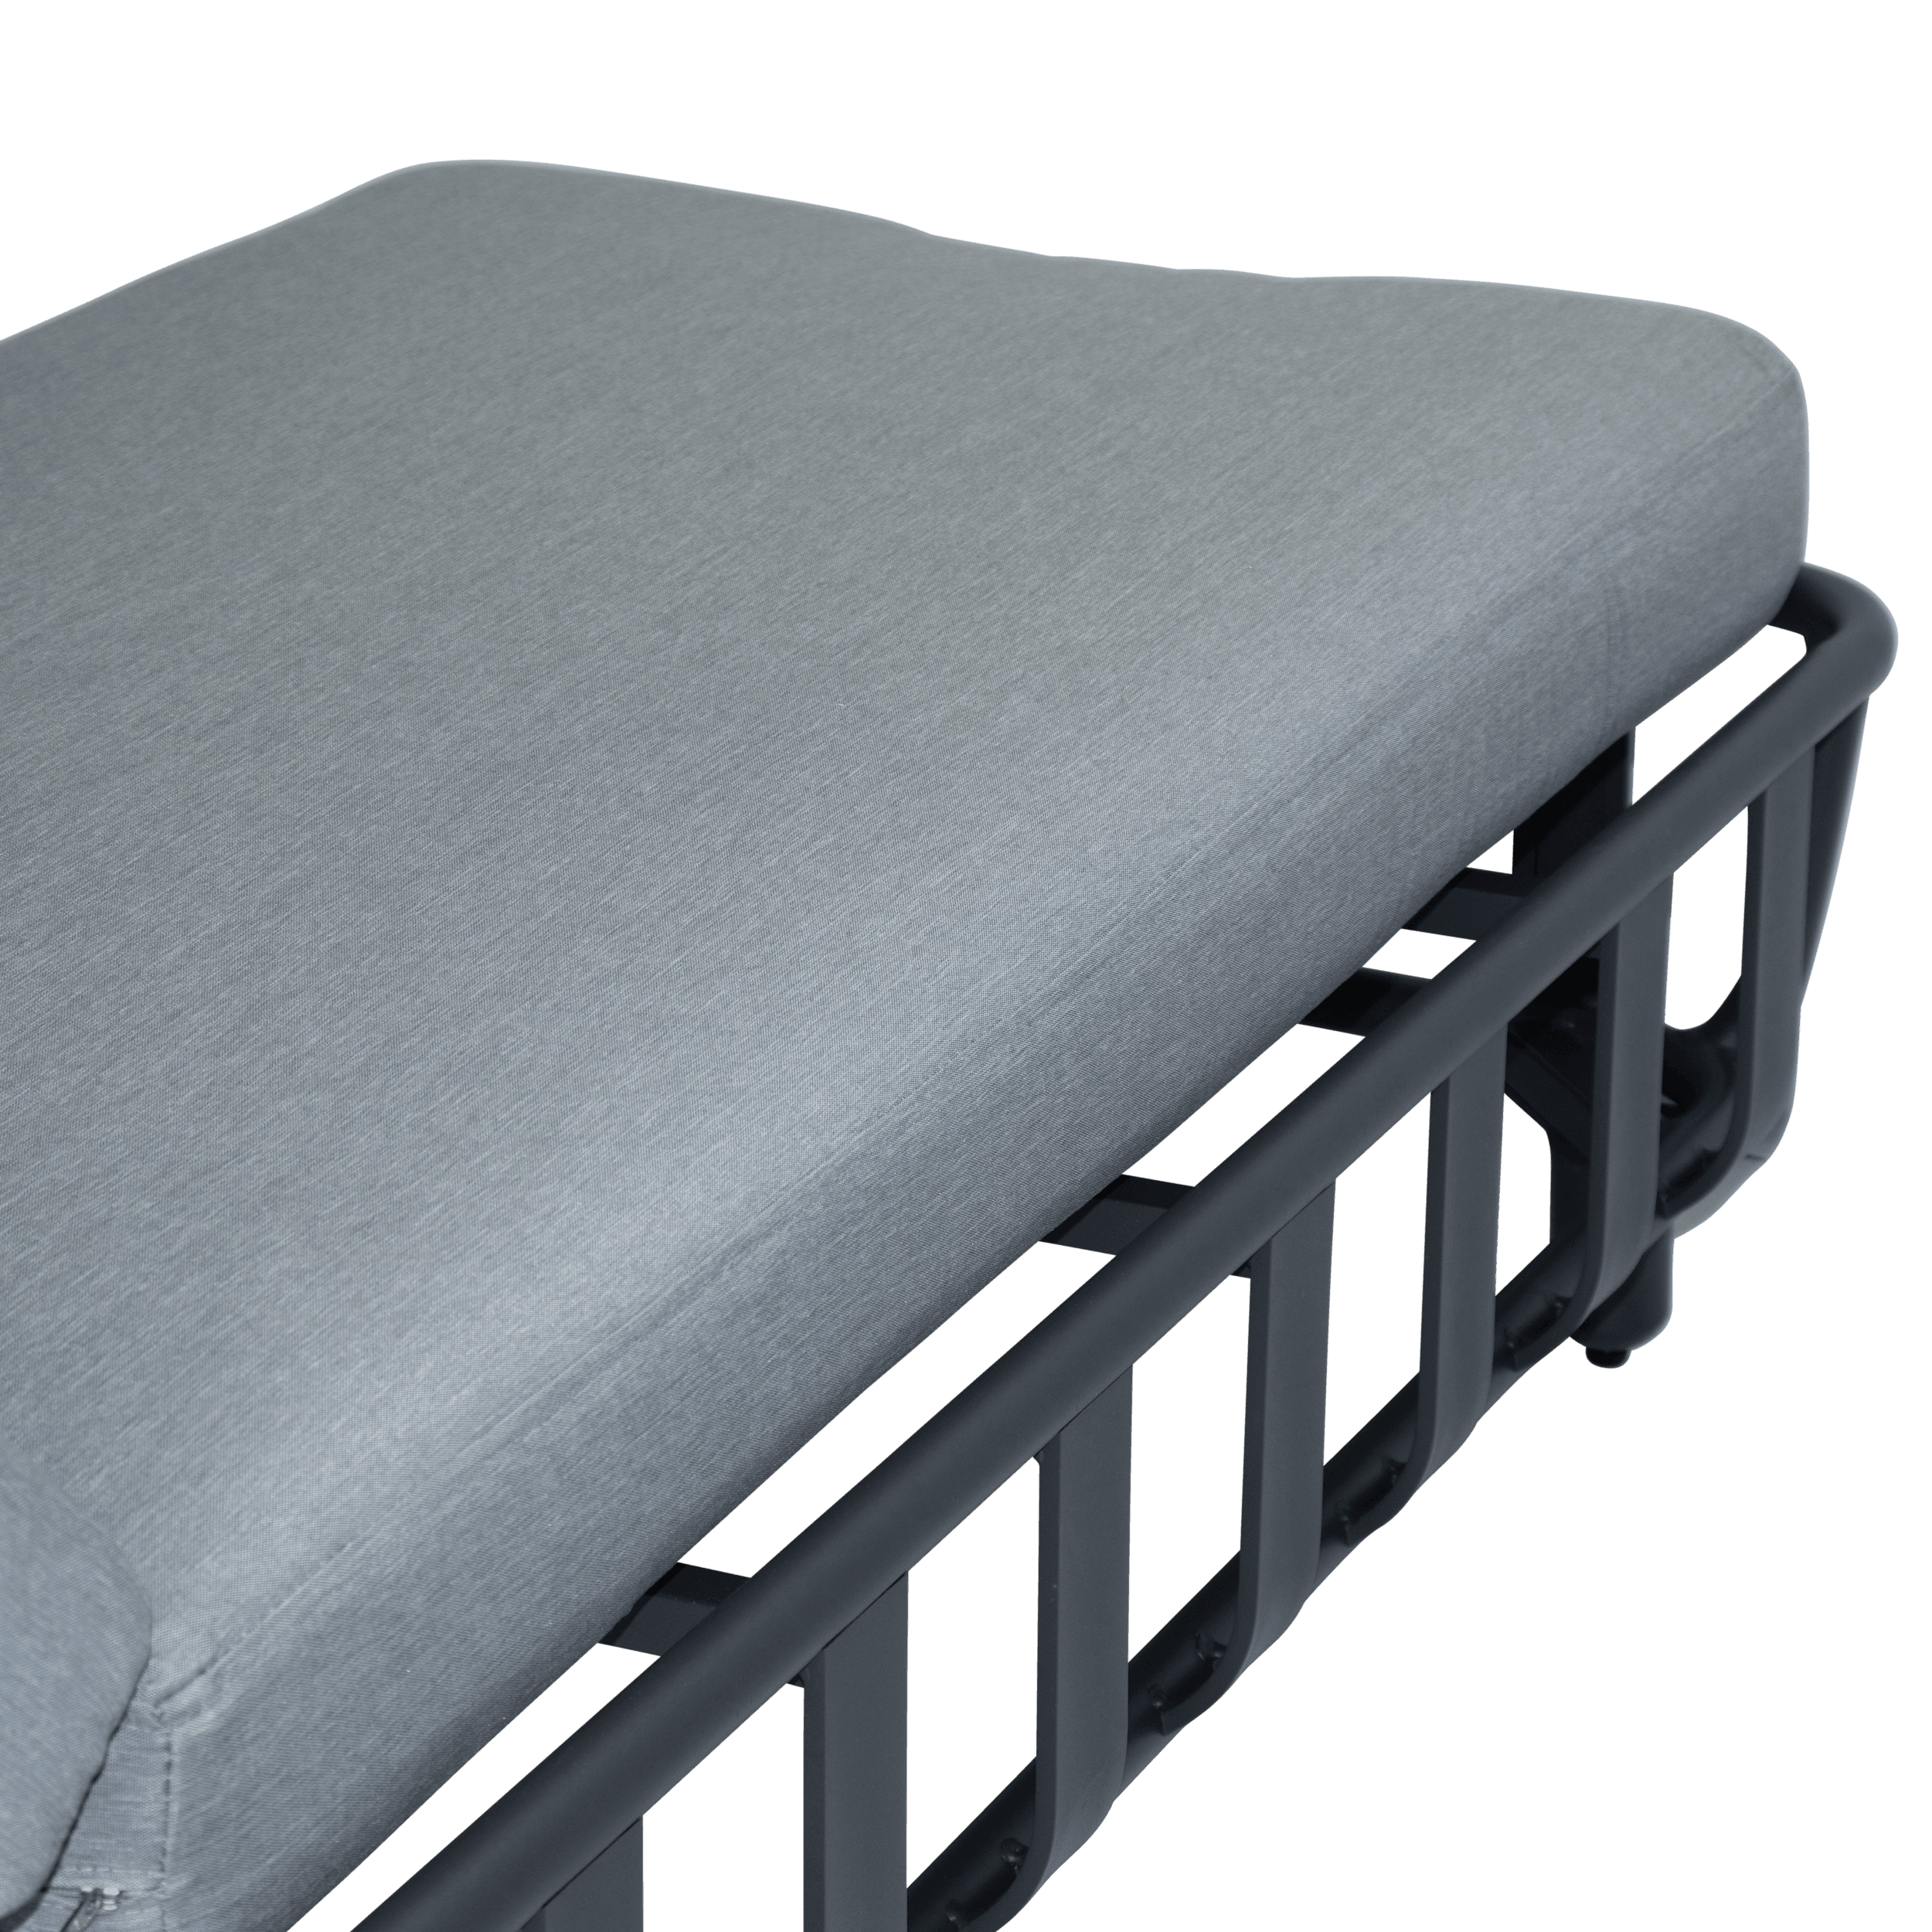 Sorrento Sunlounger in Gunmetal with Spuncrylic Stone Grey Cushions - The Furniture Shack